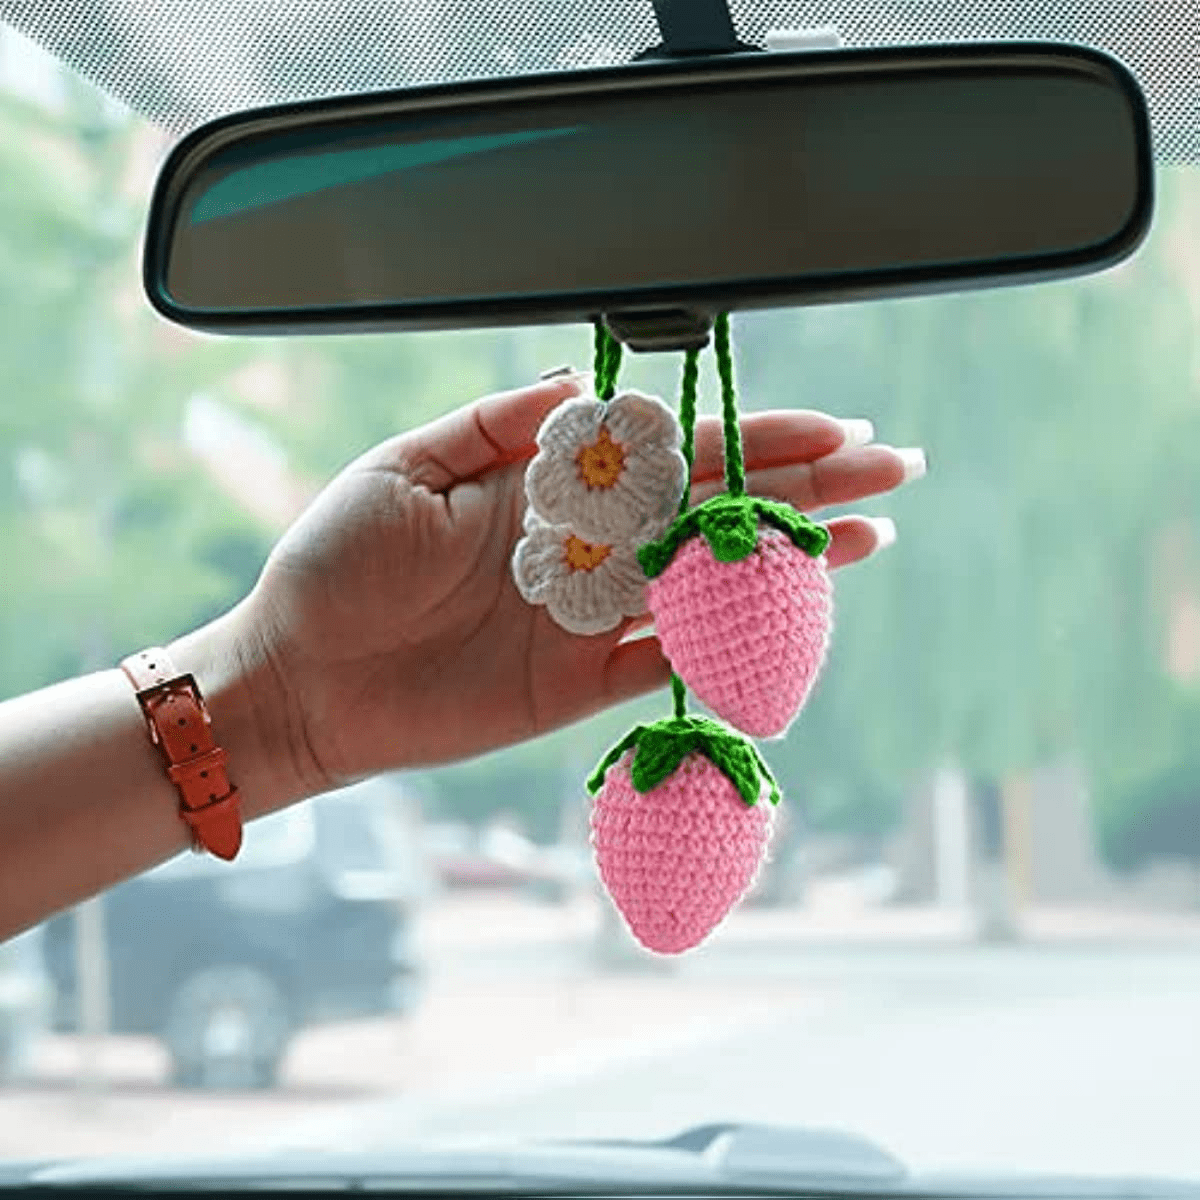 Handmade Crochet Kawaii Accessories - Keychains / Bag charms / Fridge magnets / Car hangings - Unique and Colorful mini gifts